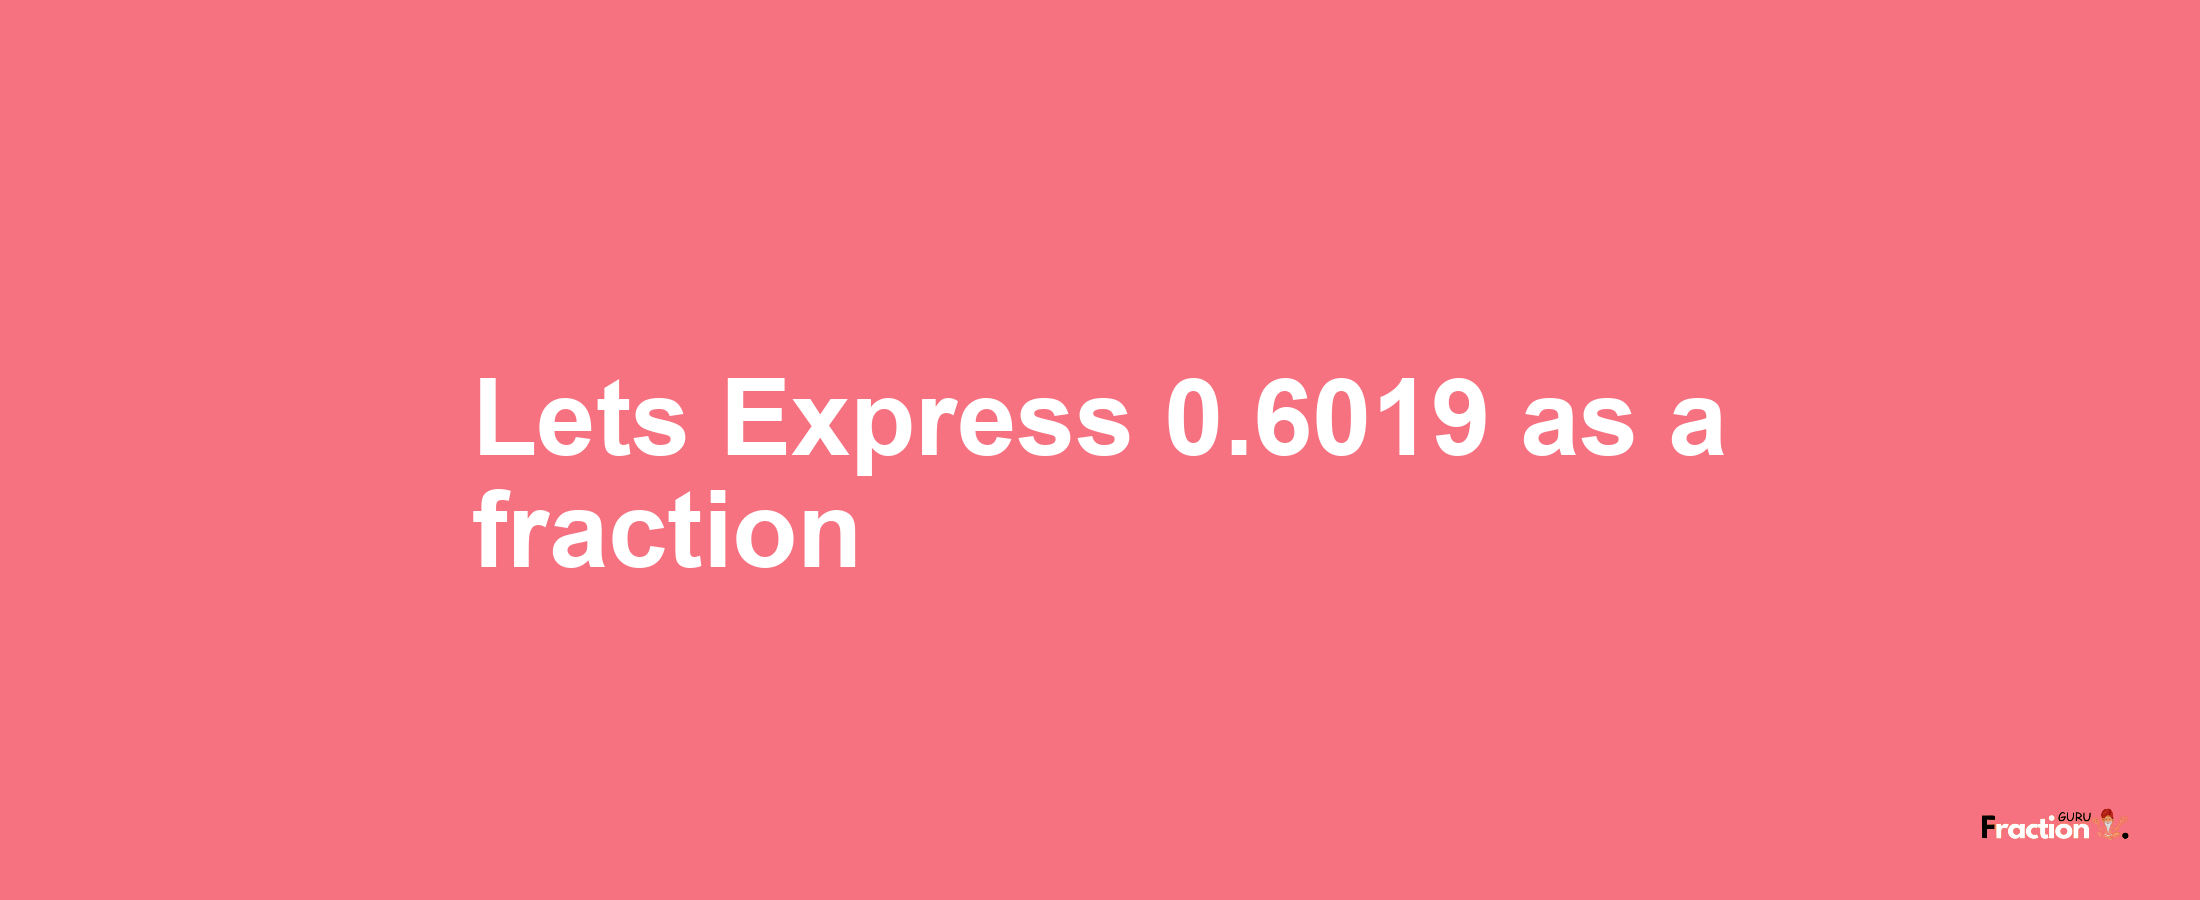 Lets Express 0.6019 as afraction